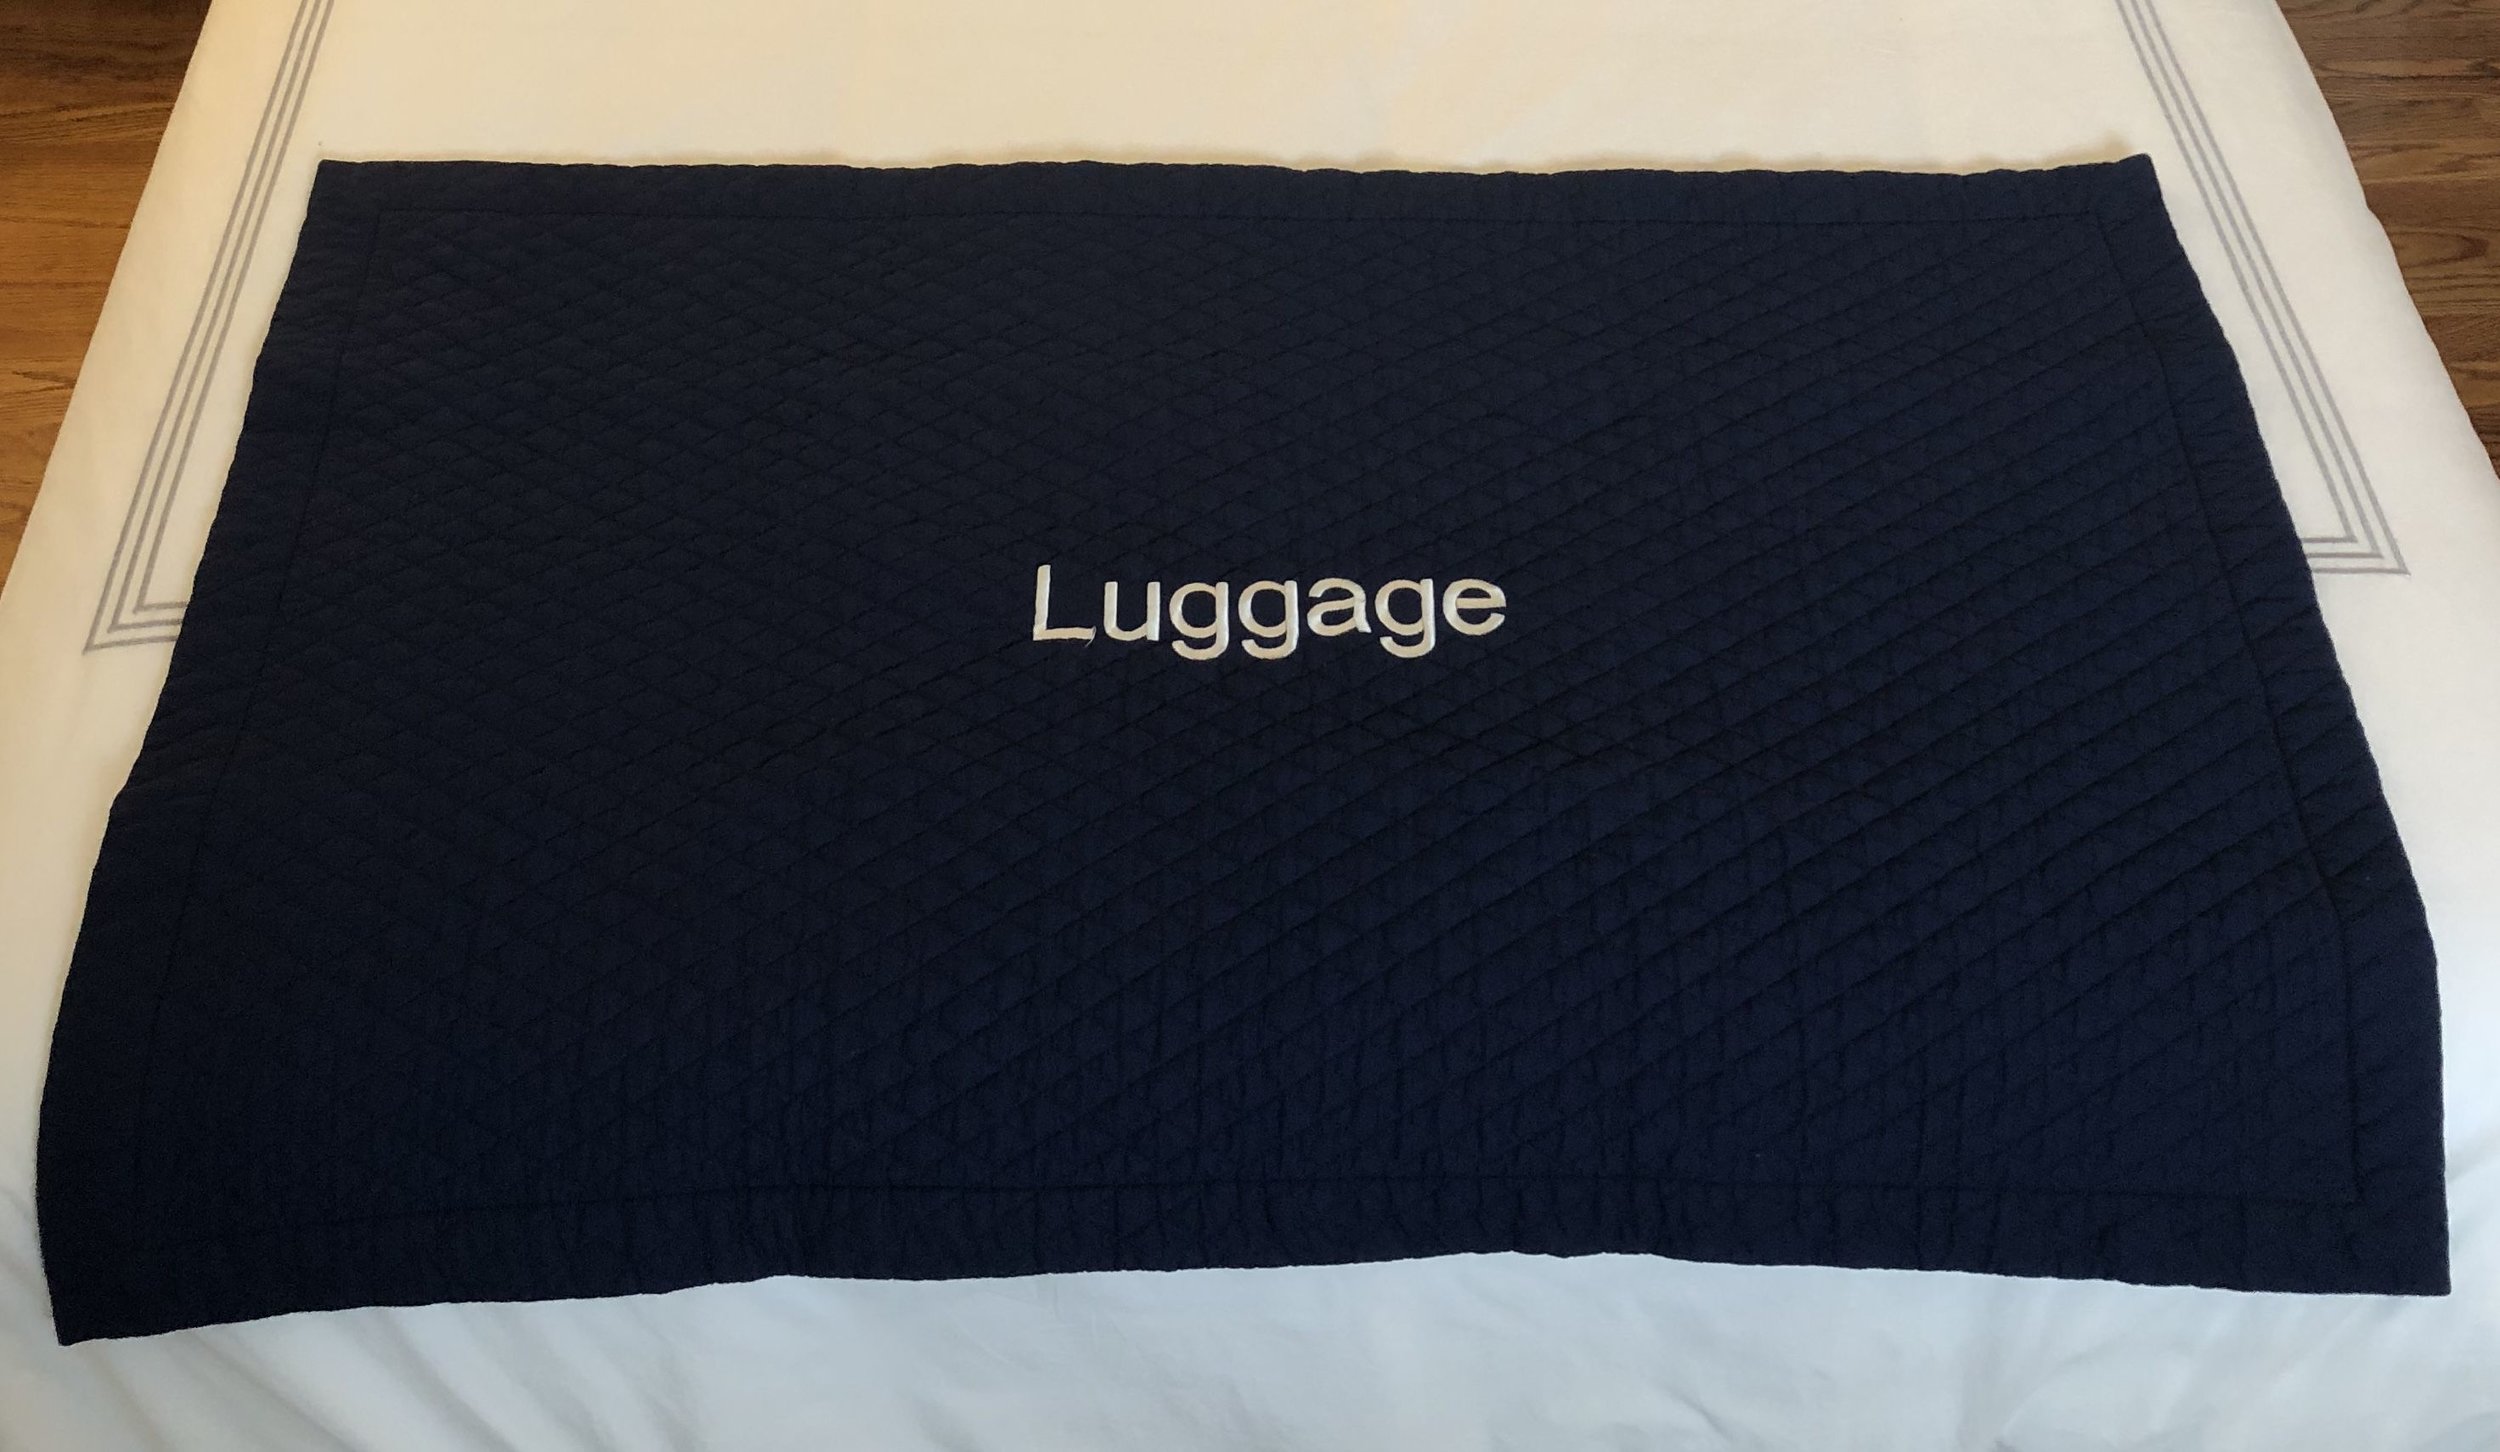  Our cotton quilted luggage mat adds the finishing touch to the cabin or bed, helping to protect your expensive linens from outside bags when guests arrive. Easily machine washable and ironed.    Each mat can be embroidered with the word Luggage or a